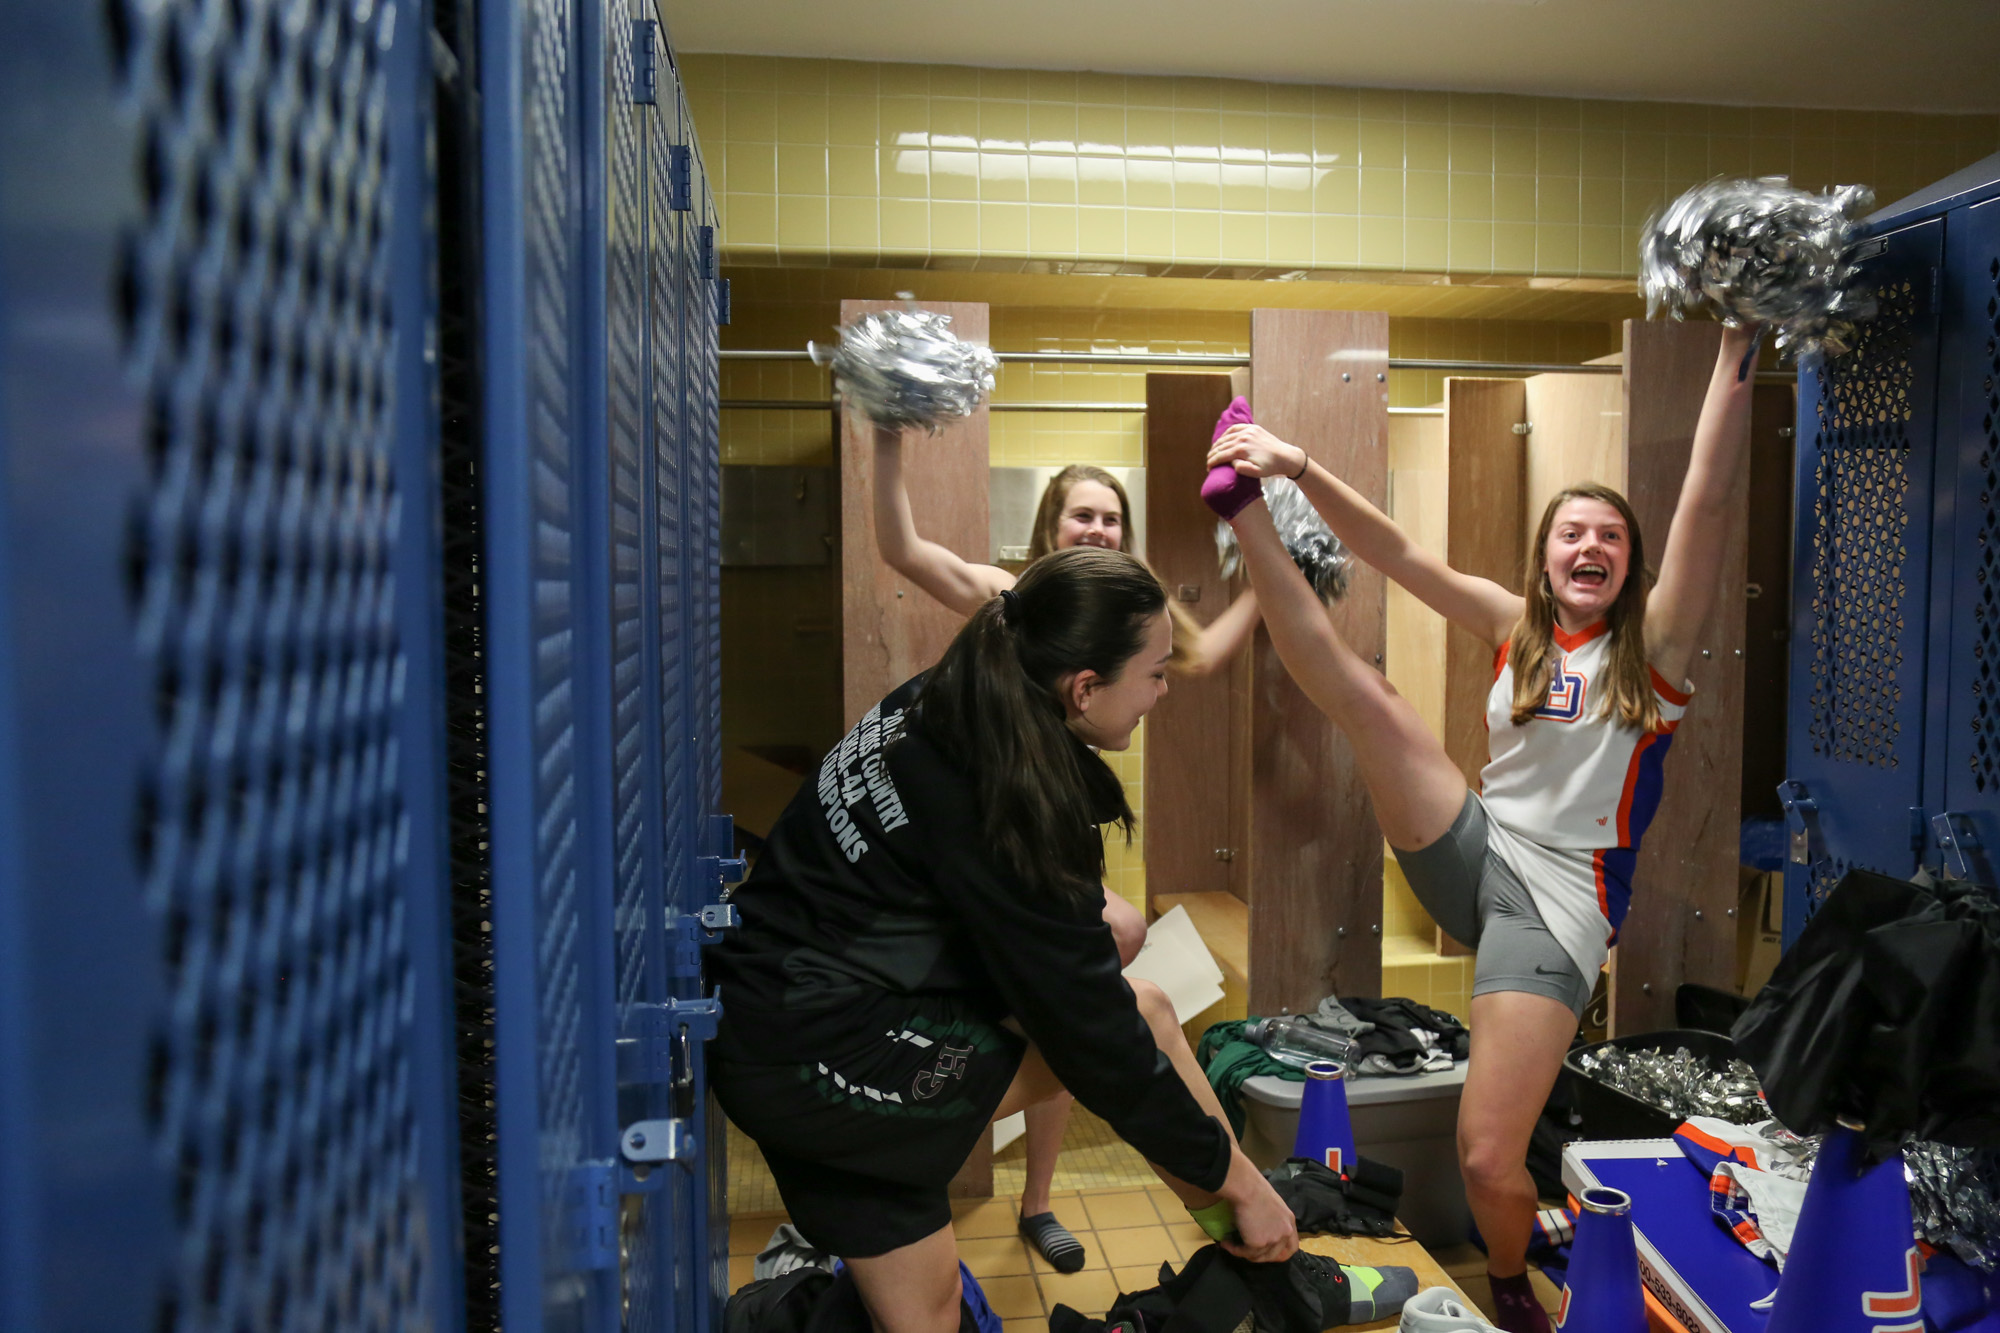  Green Hope's Emily Schoeffler and Catherine Holbrook dance for fun in the locker room before their game with Athens Drive High School on Feb.10, 2017. 